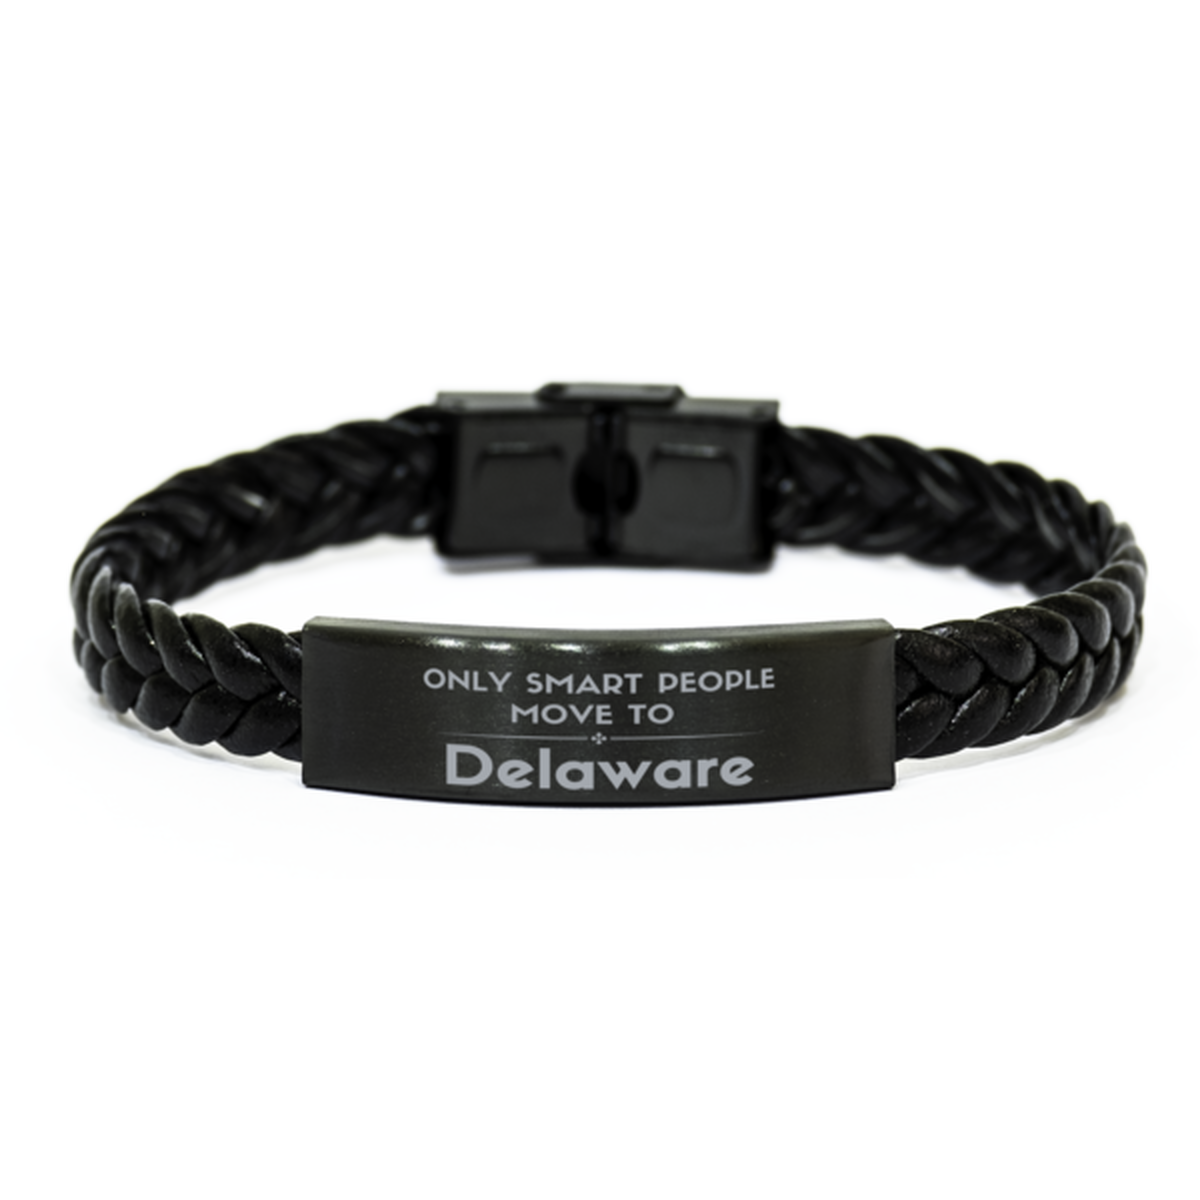 Only smart people move to Delaware Braided Leather Bracelet, Gag Gifts For Delaware, Move to Delaware Gifts for Friends Coworker Funny Saying Quote